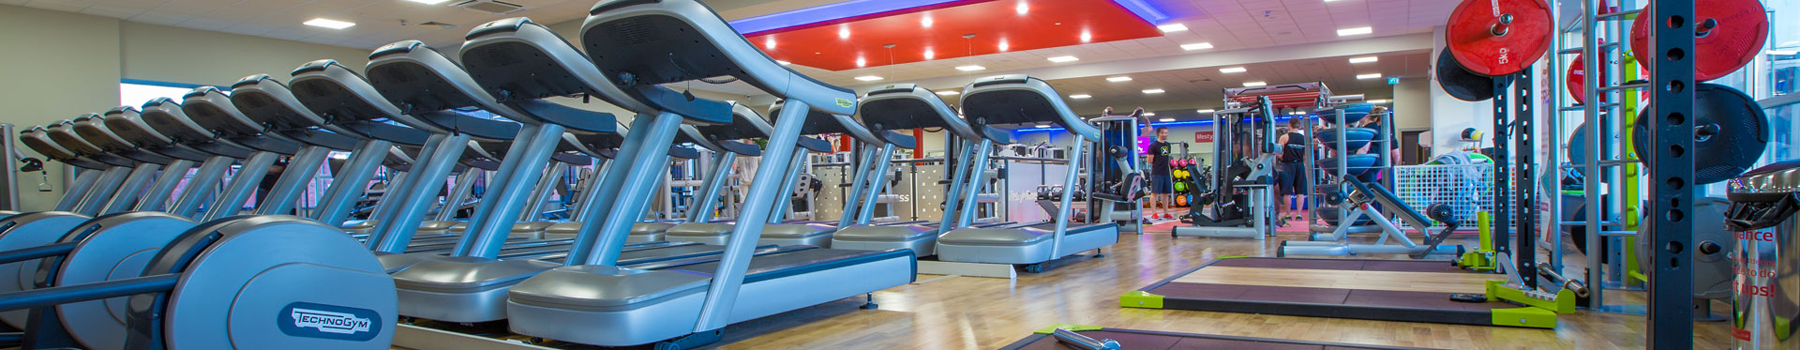 Sealing the Deal: The Benefits of a Gym Broker